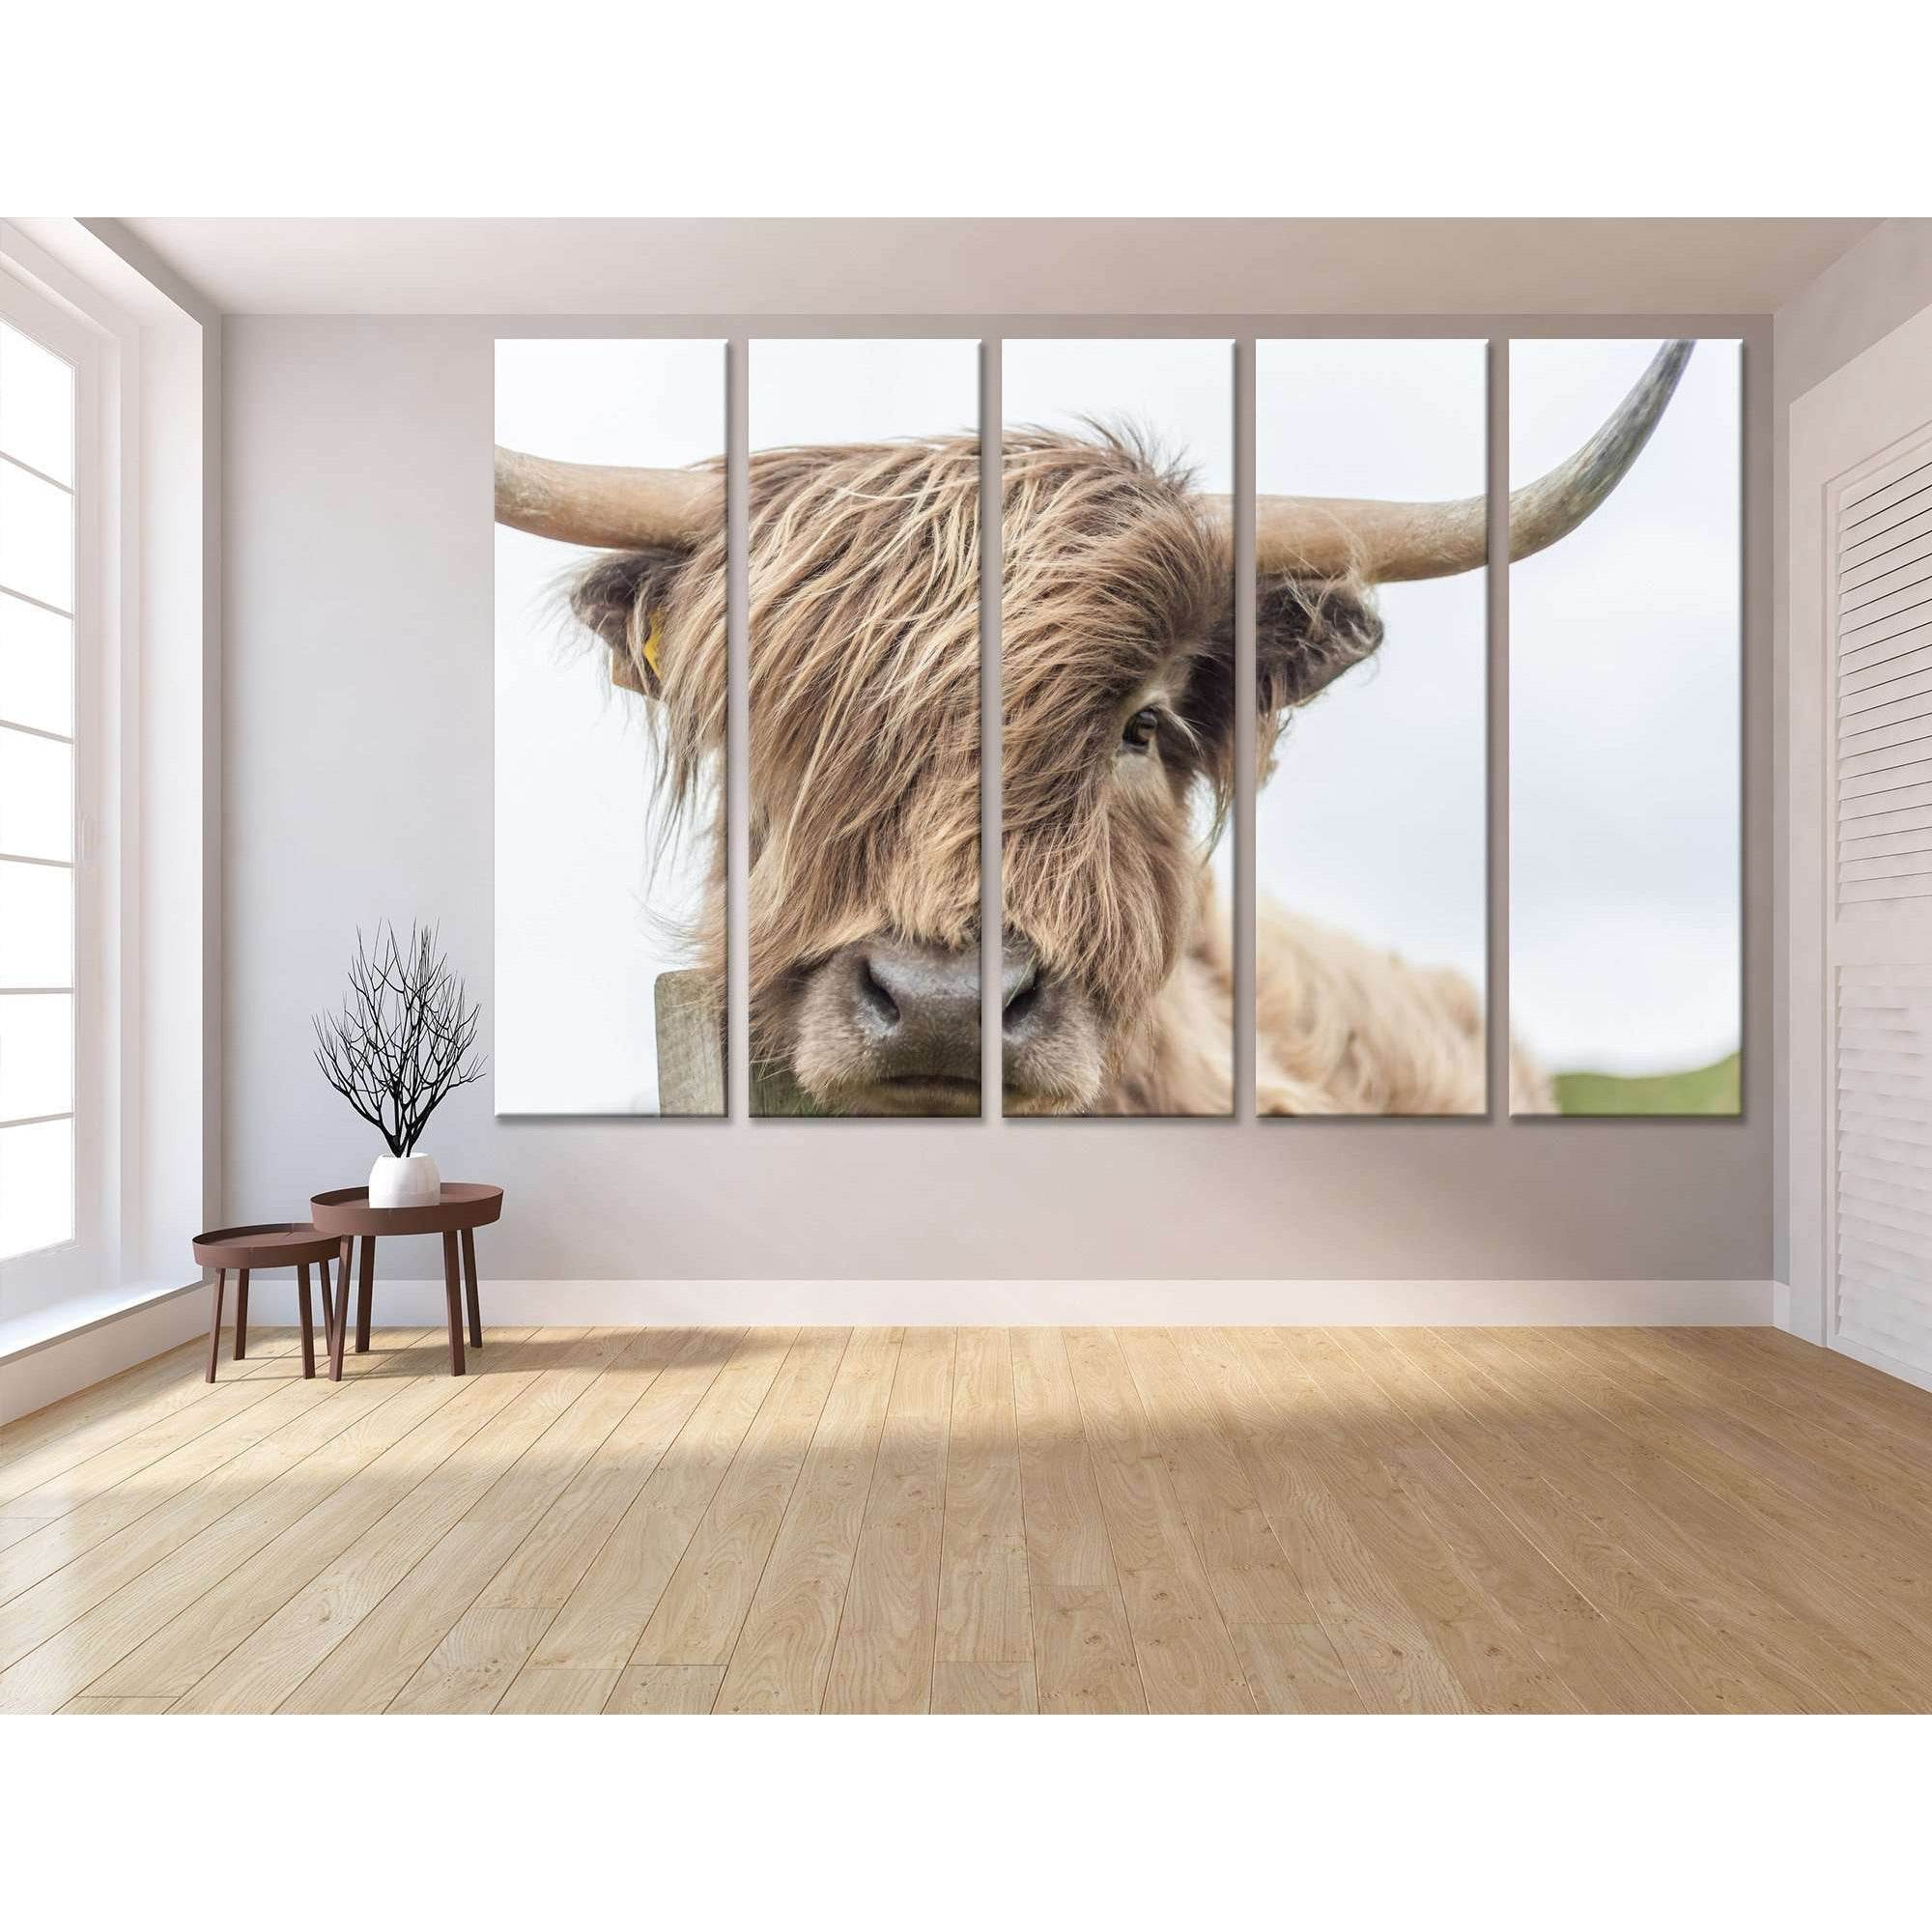 Highland Cow №04123 Ready to Hang Canvas Print